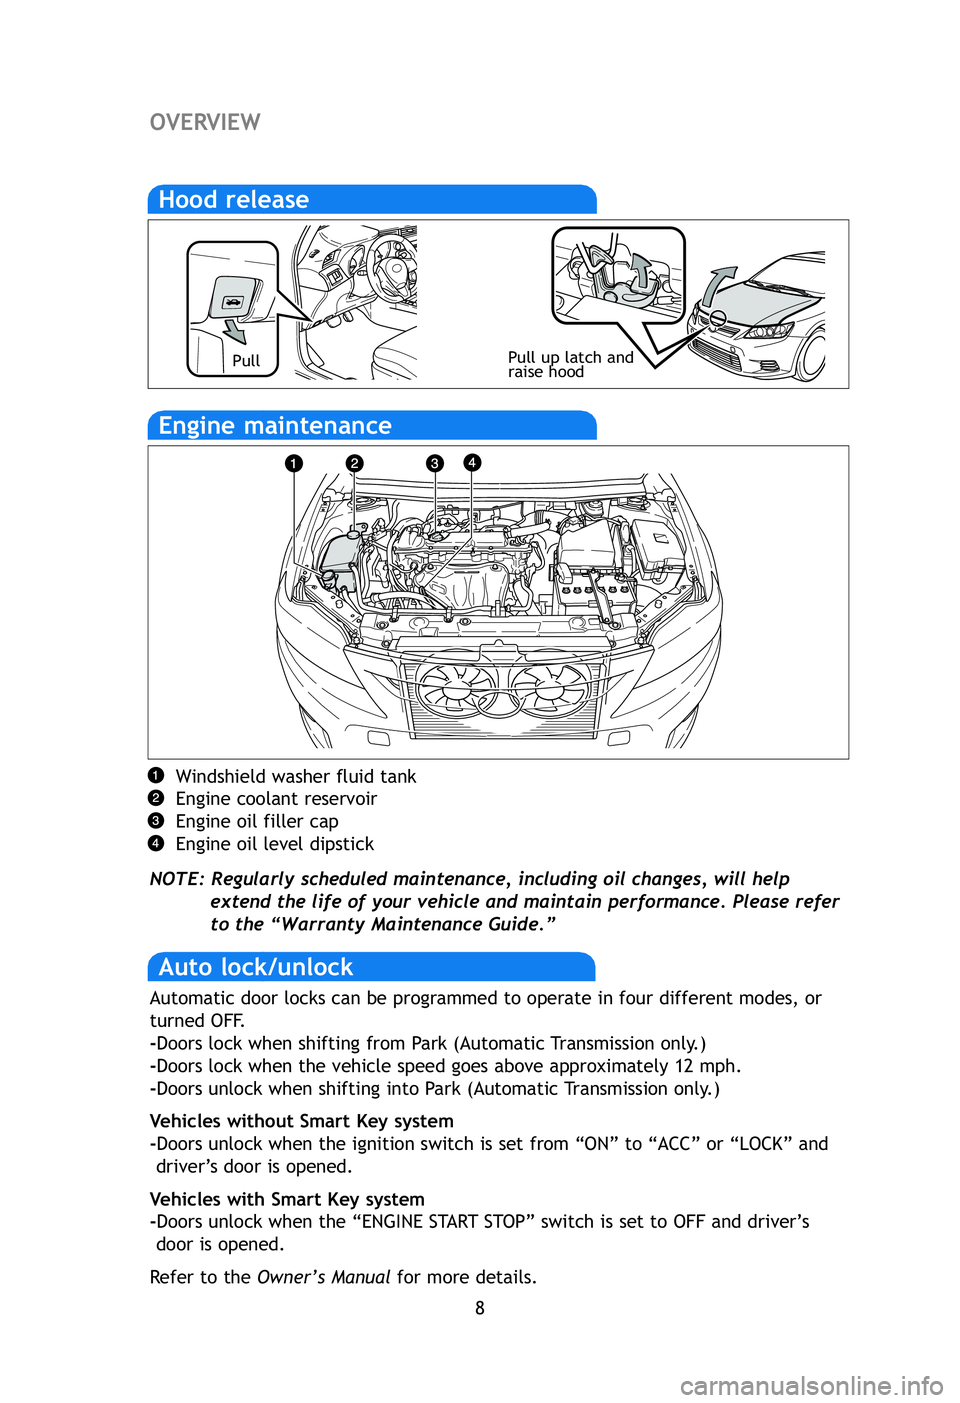 TOYOTA tC 2012  Owners Manual (in English) 8
FE
Au
* Thedep
Dow
For b
leve
Til
Hold
NOT
Pa
Engine maintenance
Windshield washer fluid tank
Engine coolant reservoir
Engine oil filler cap
Engine oil level dipstick
NOTE: Regularly scheduled maint